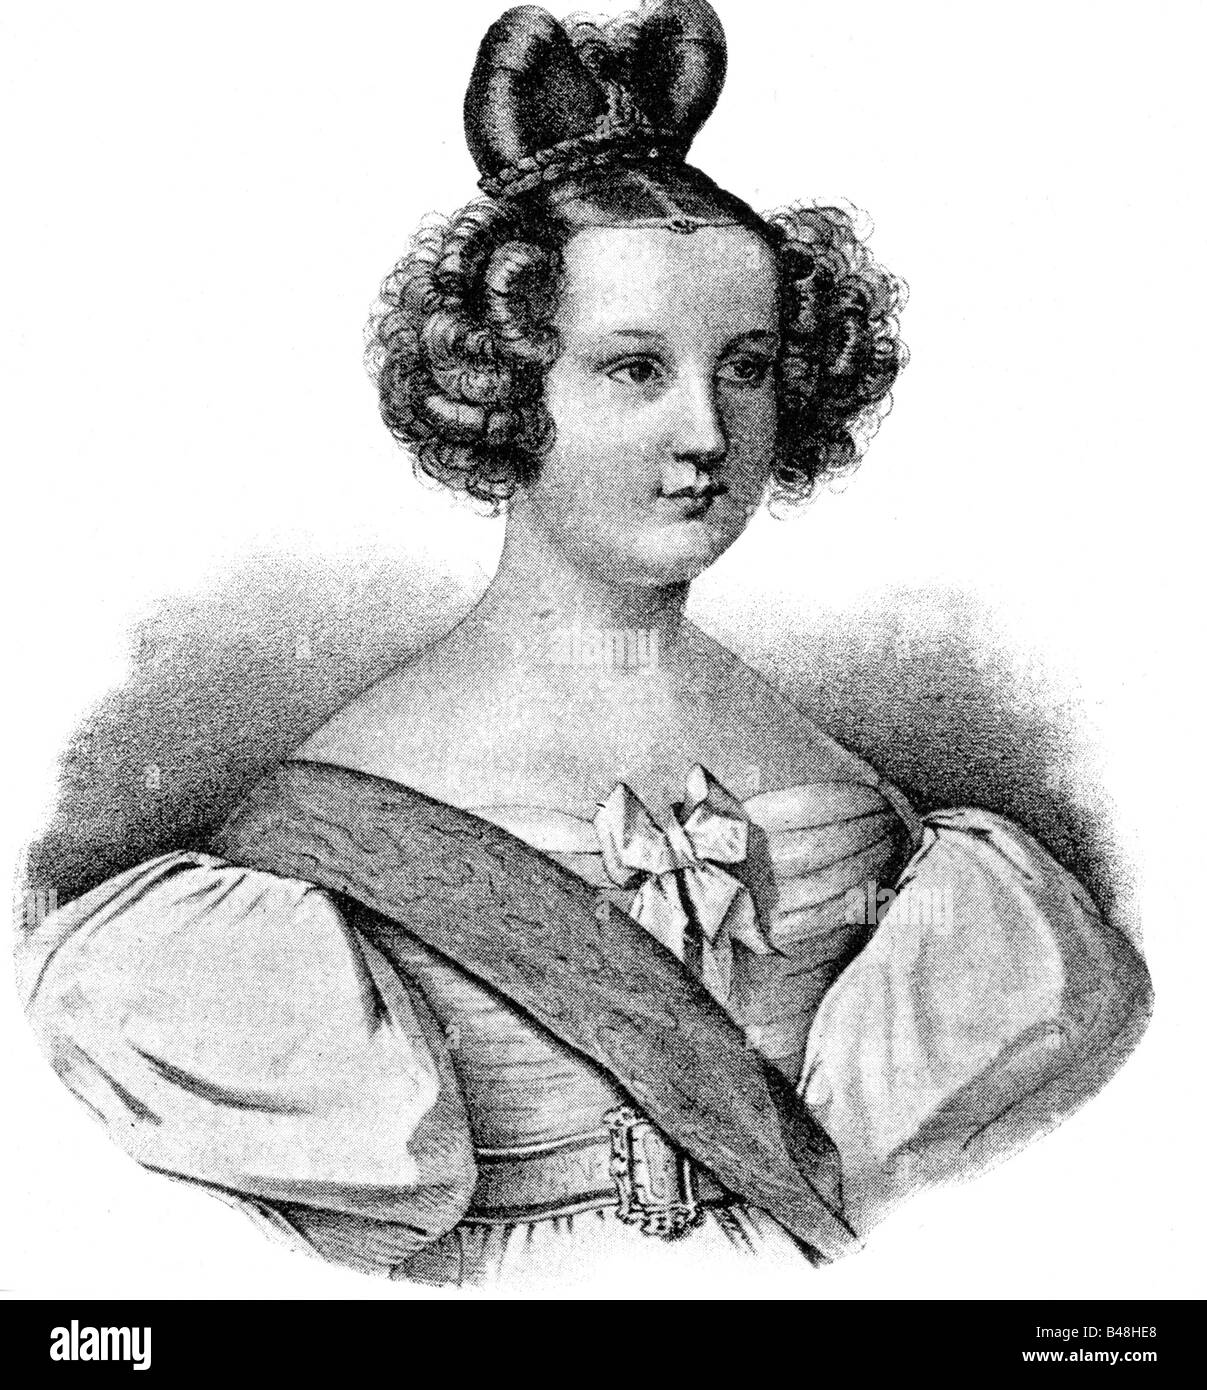 Maria II. 'da Gloria', 4.4.1819 - 15.11.1853, Queen of  Portugal 5.5.1826 - 30.6.1828 & 26.5.1834 - 15.11.1853, portrait, lithography by A. Kneißel after Cecilie Brand, 1833, Braganca, Mary, Kneissel, , Stock Photo